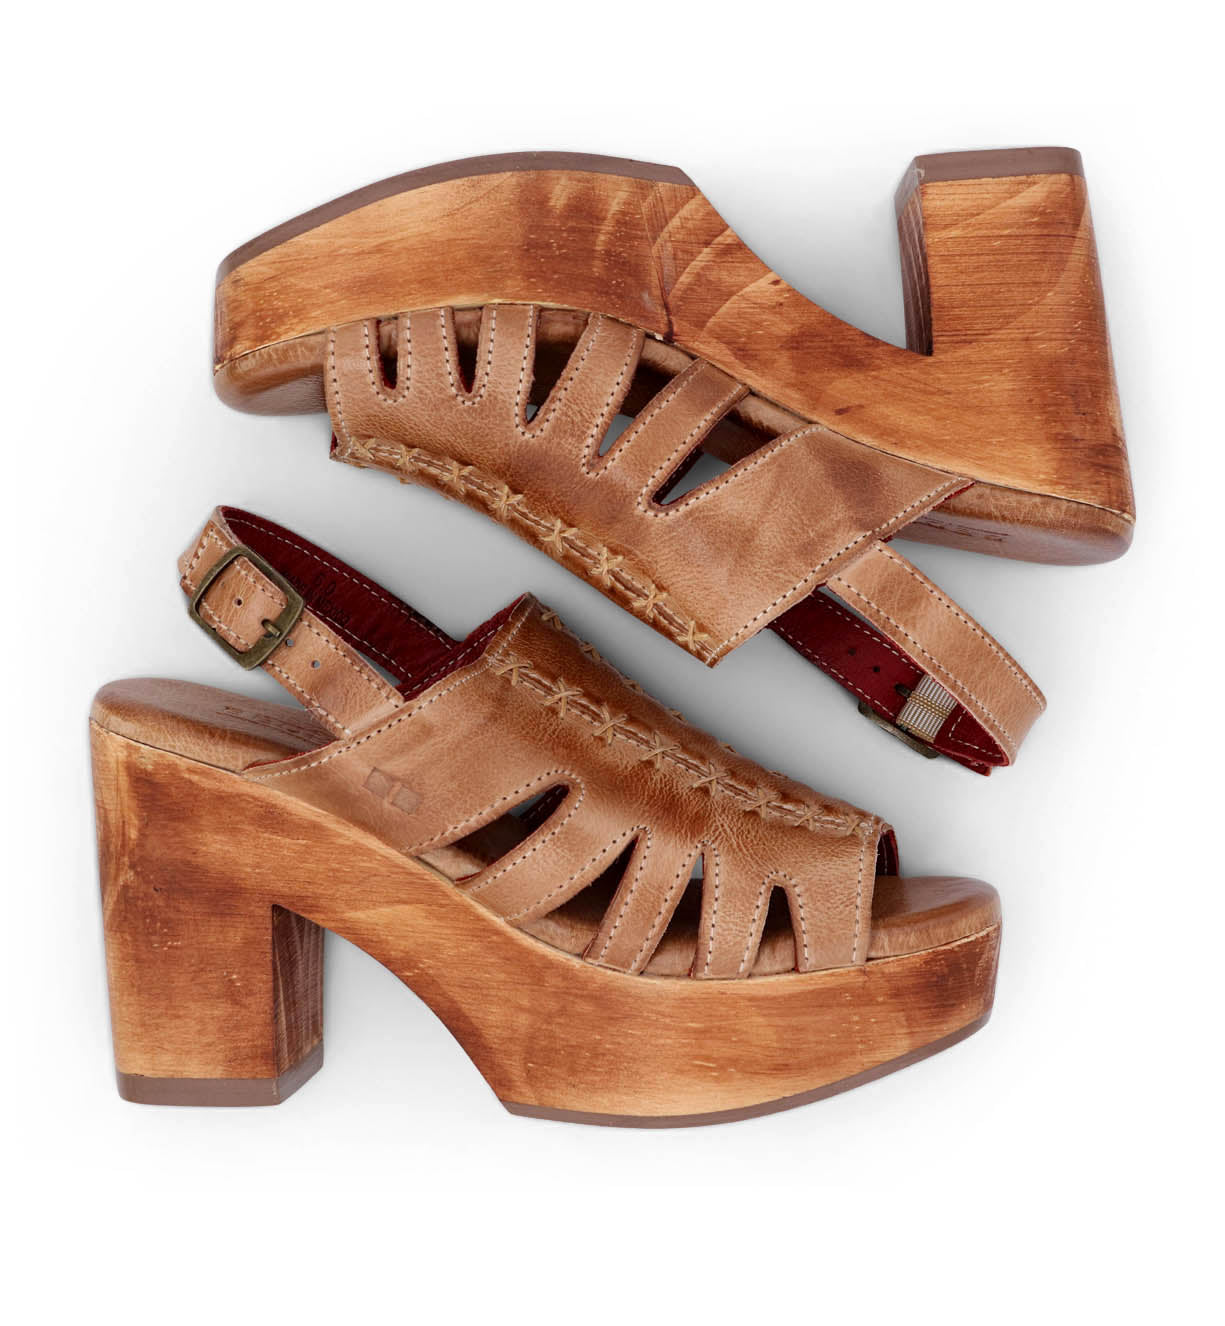 A pair of Bed Stu Fontella women's sandals with a wooden heel.